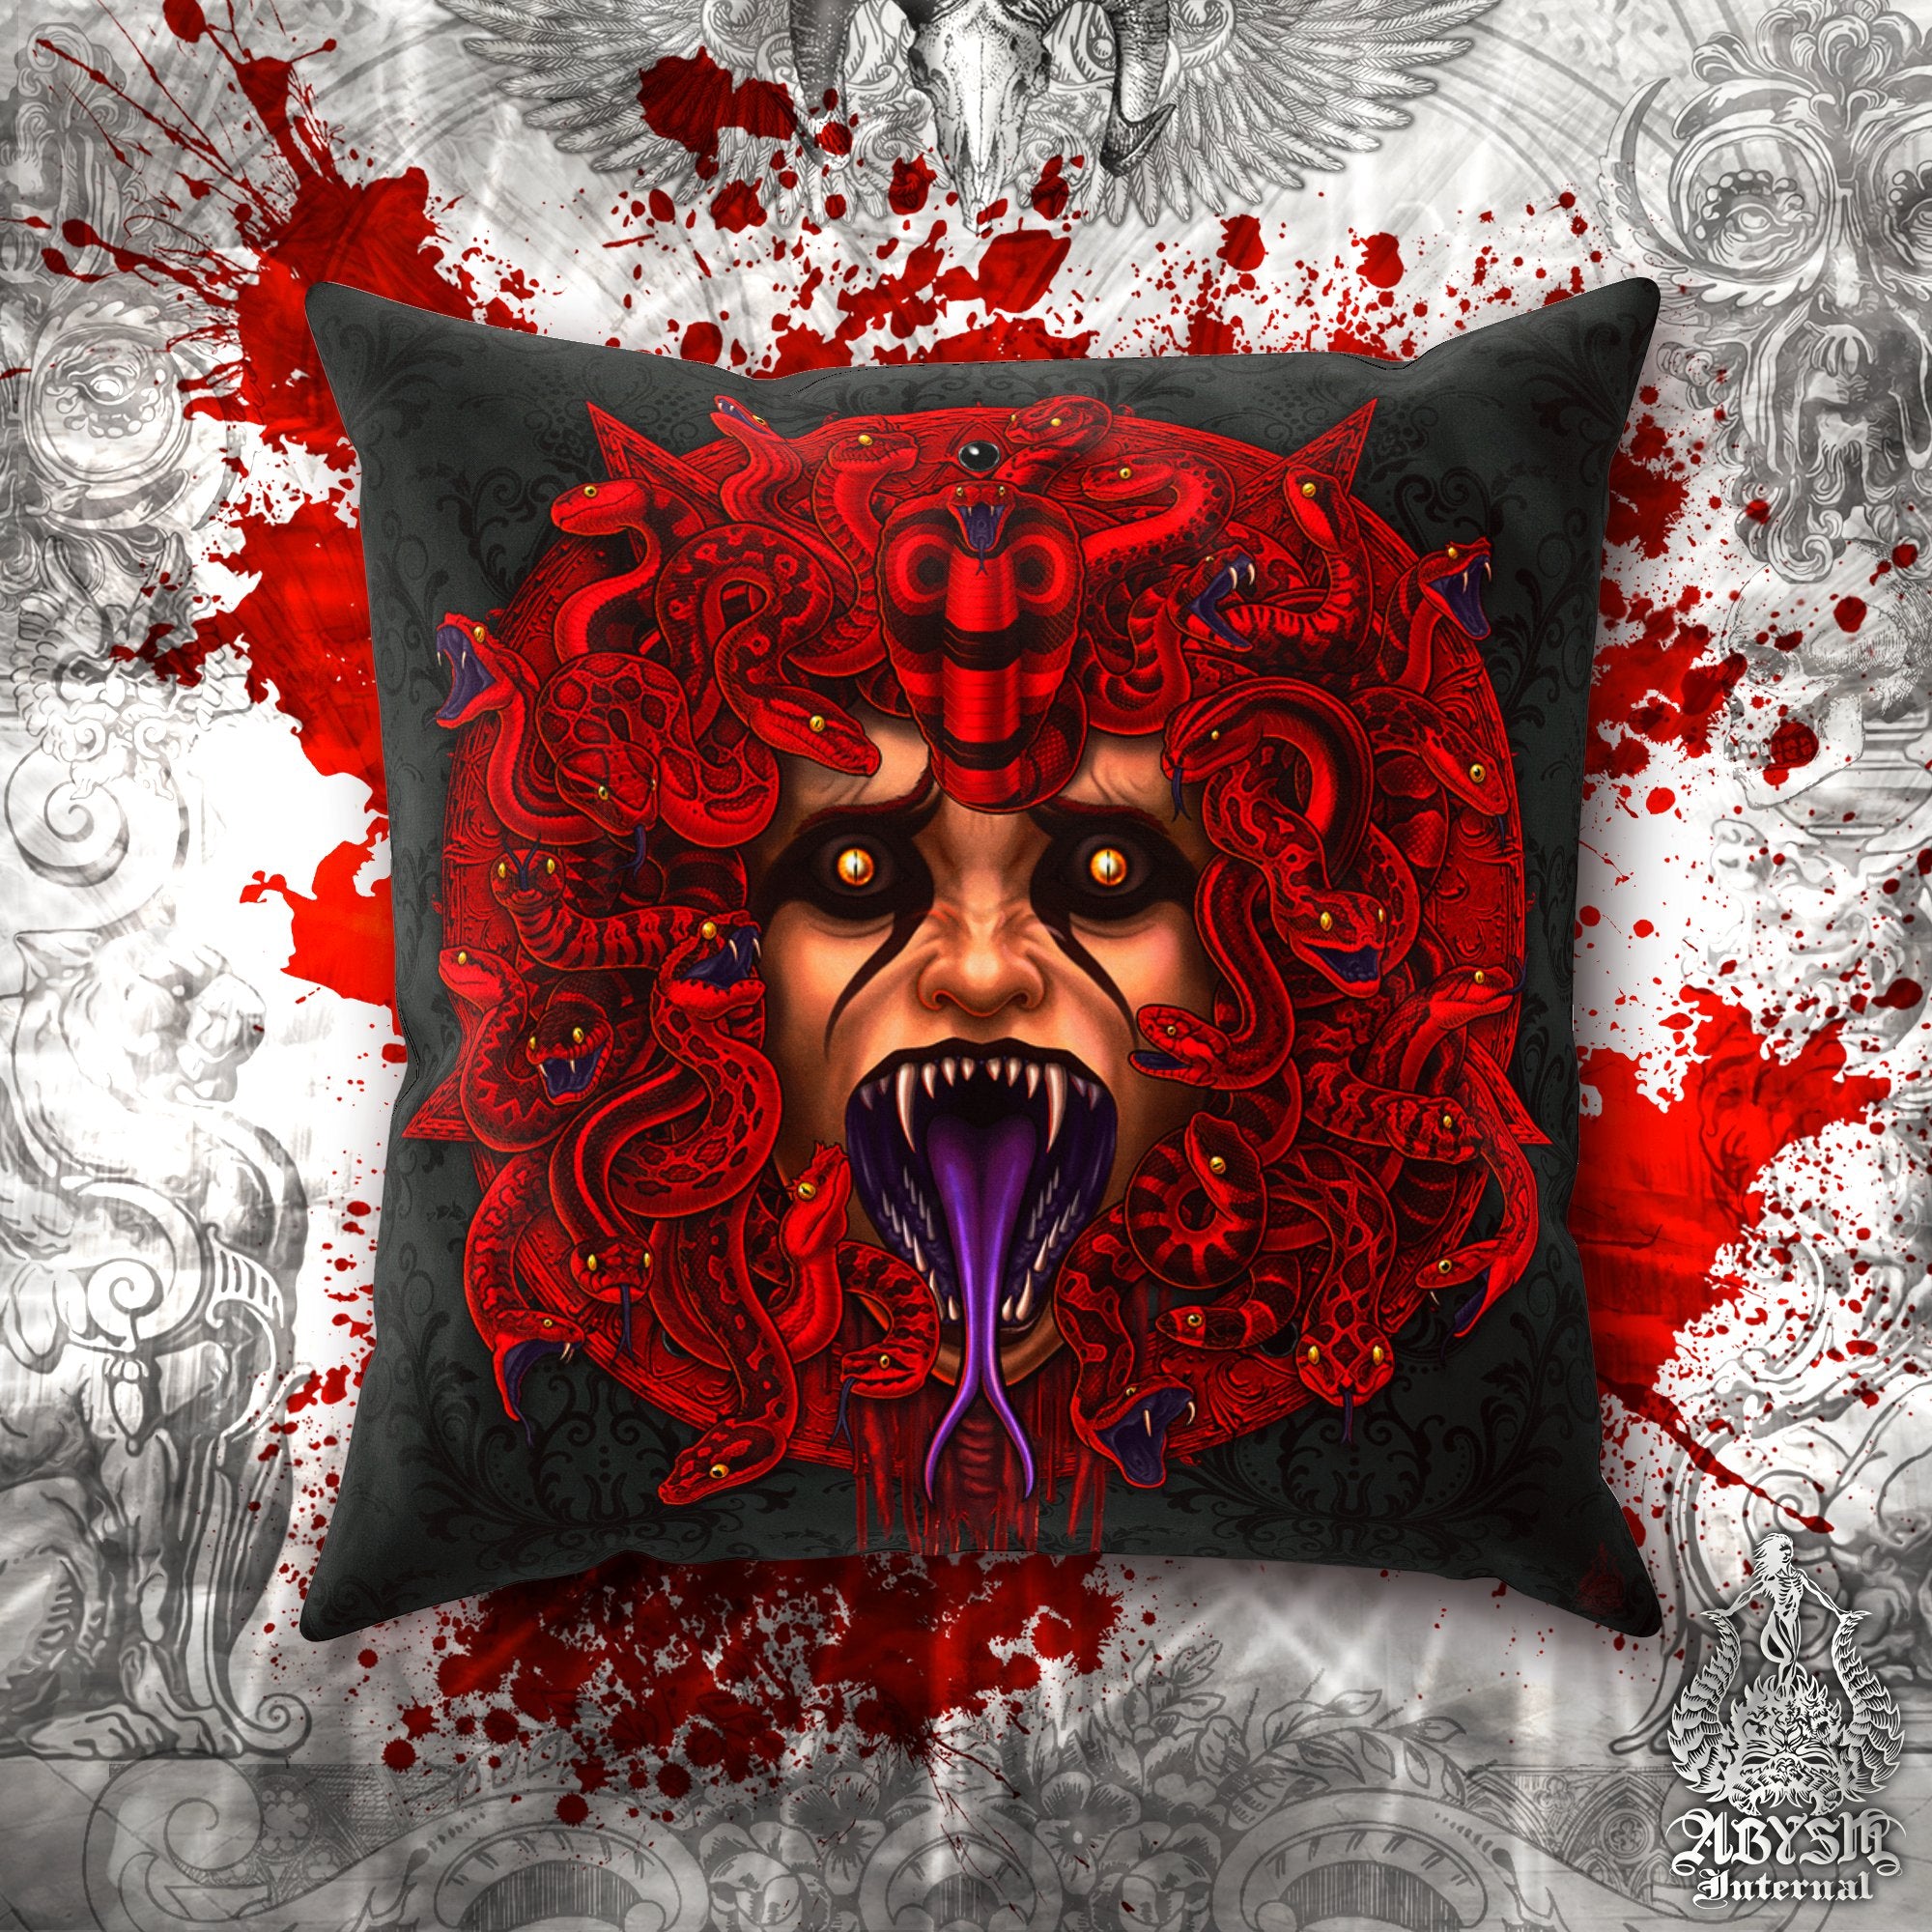 Demon Throw Pillow, Decorative Accent Pillow, Square Cushion Cover, Medusa, Satanic and Gothic Room Decor, Skull Art, Alternative Home - Red Pentagram, 3 Faces - Abysm Internal